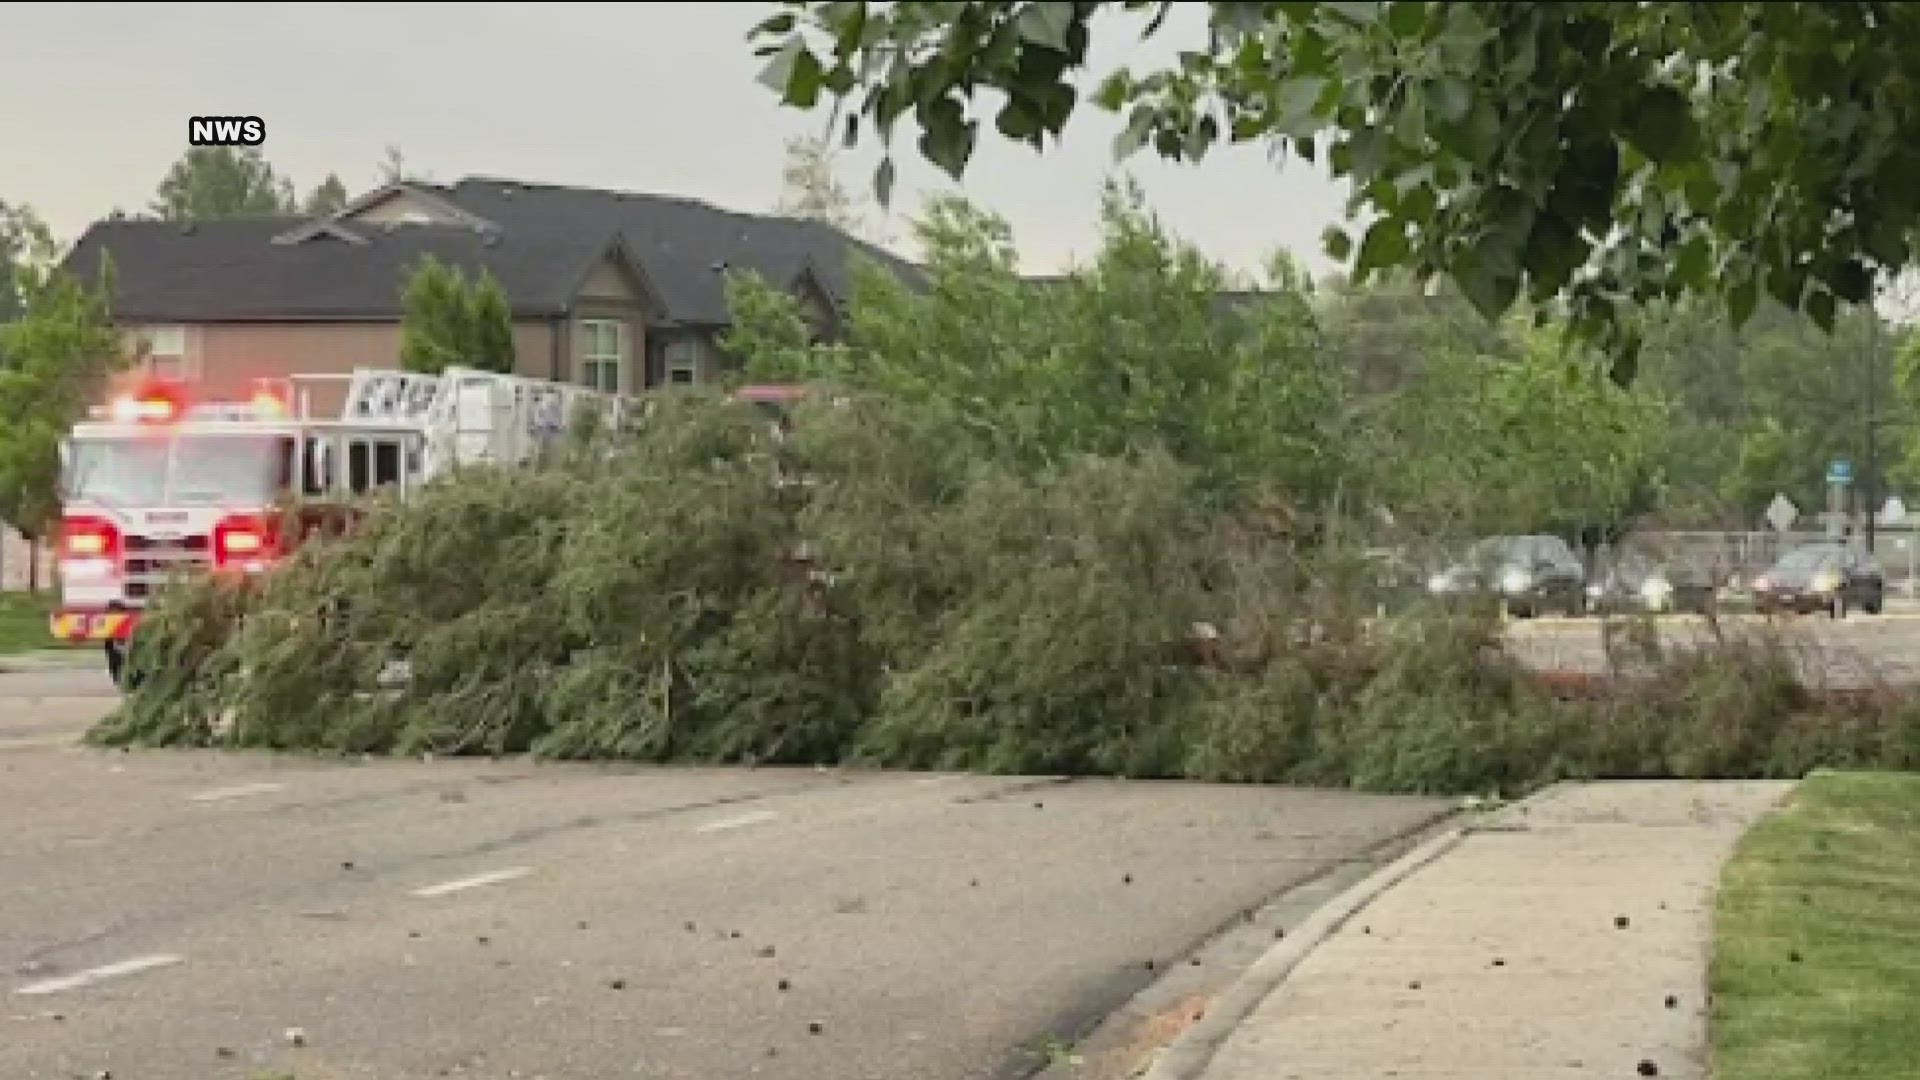 The National Weather Service in Boise said severe winds have damaged trees in the area following Tuesday's downpour.